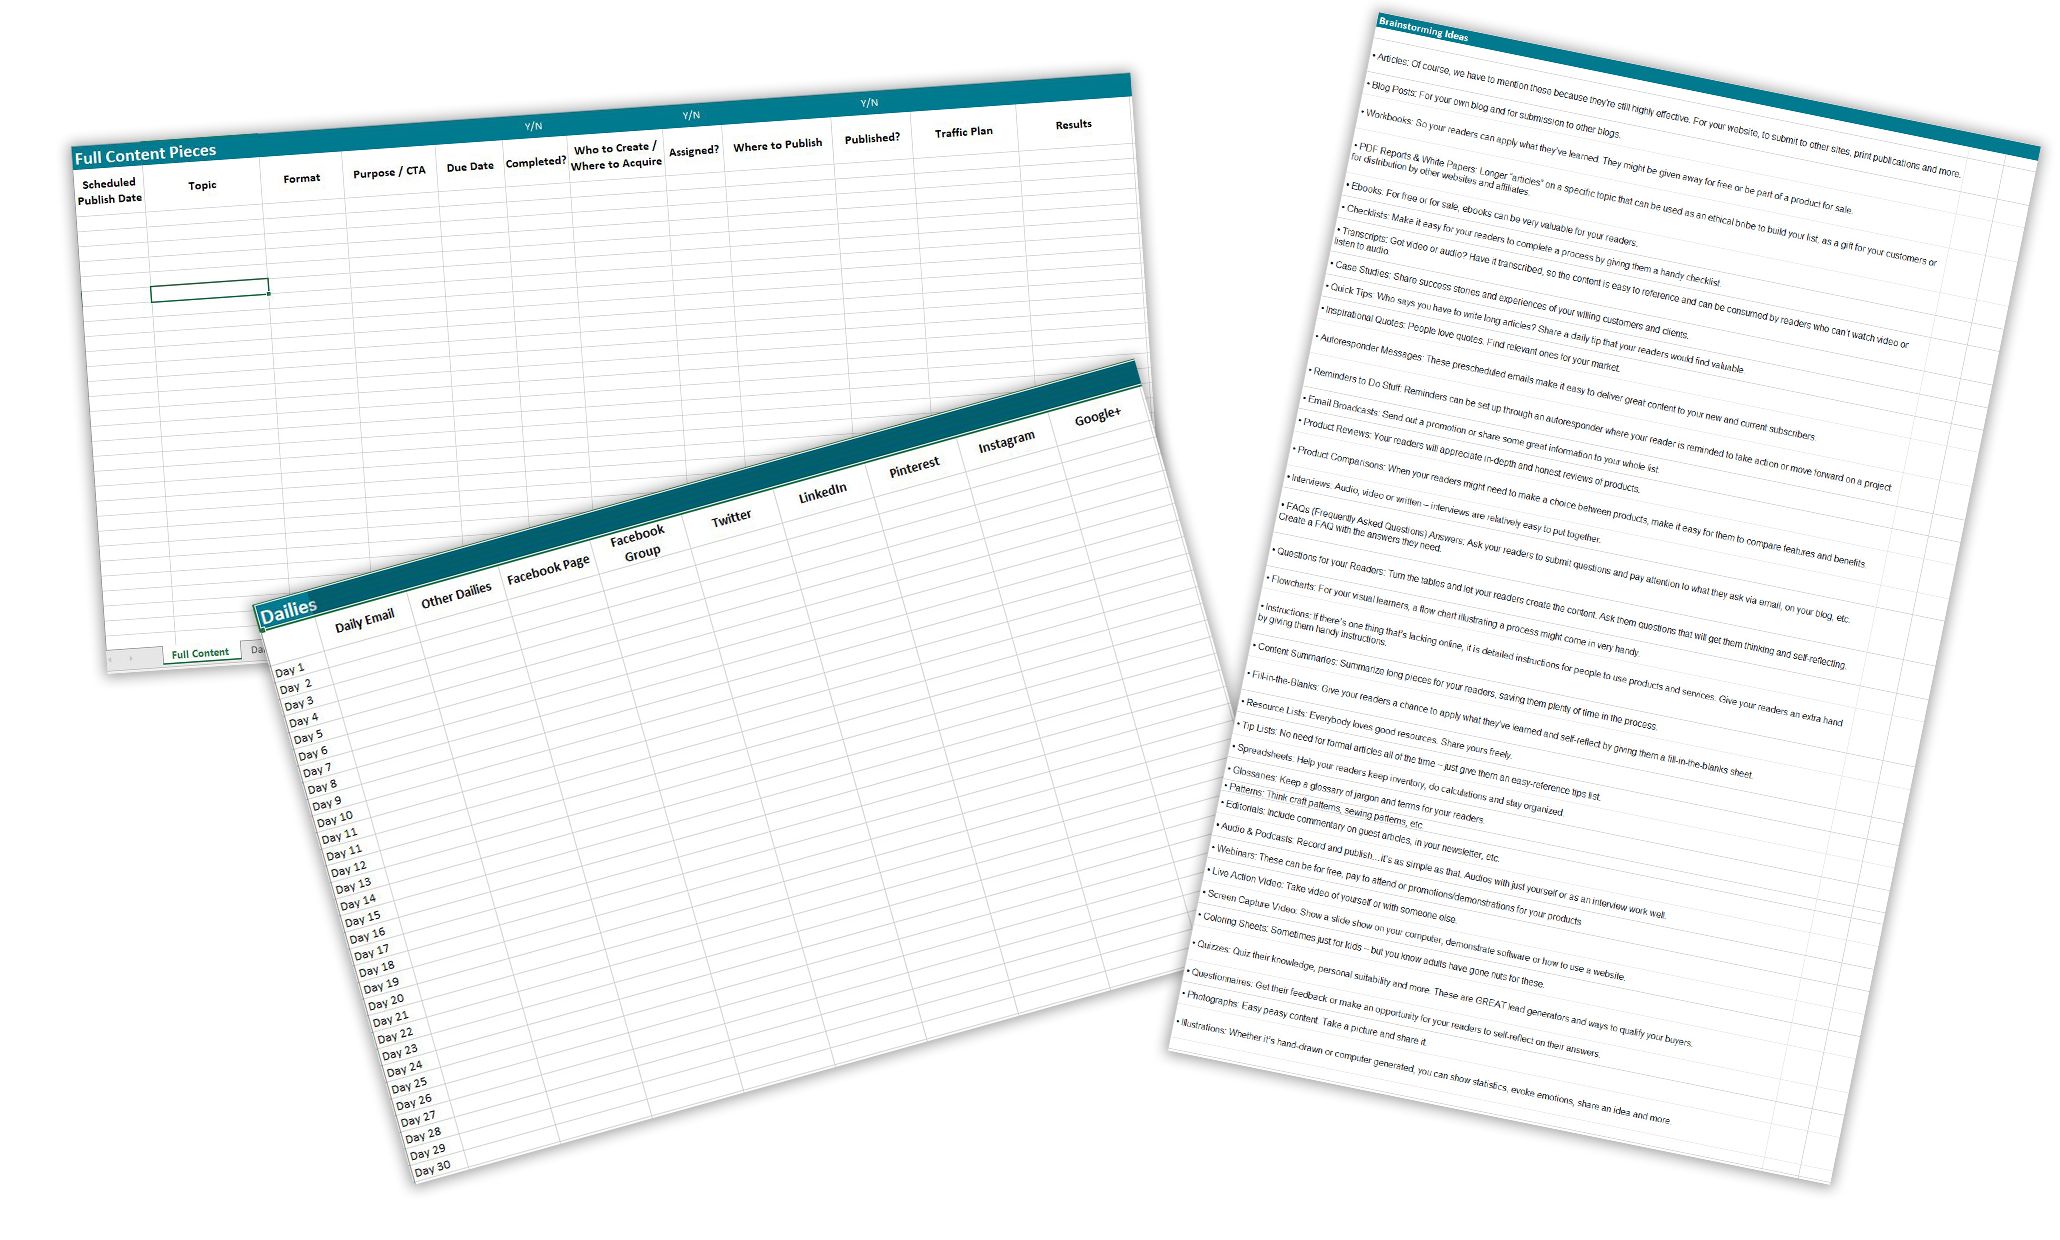 Monthly Content Planner